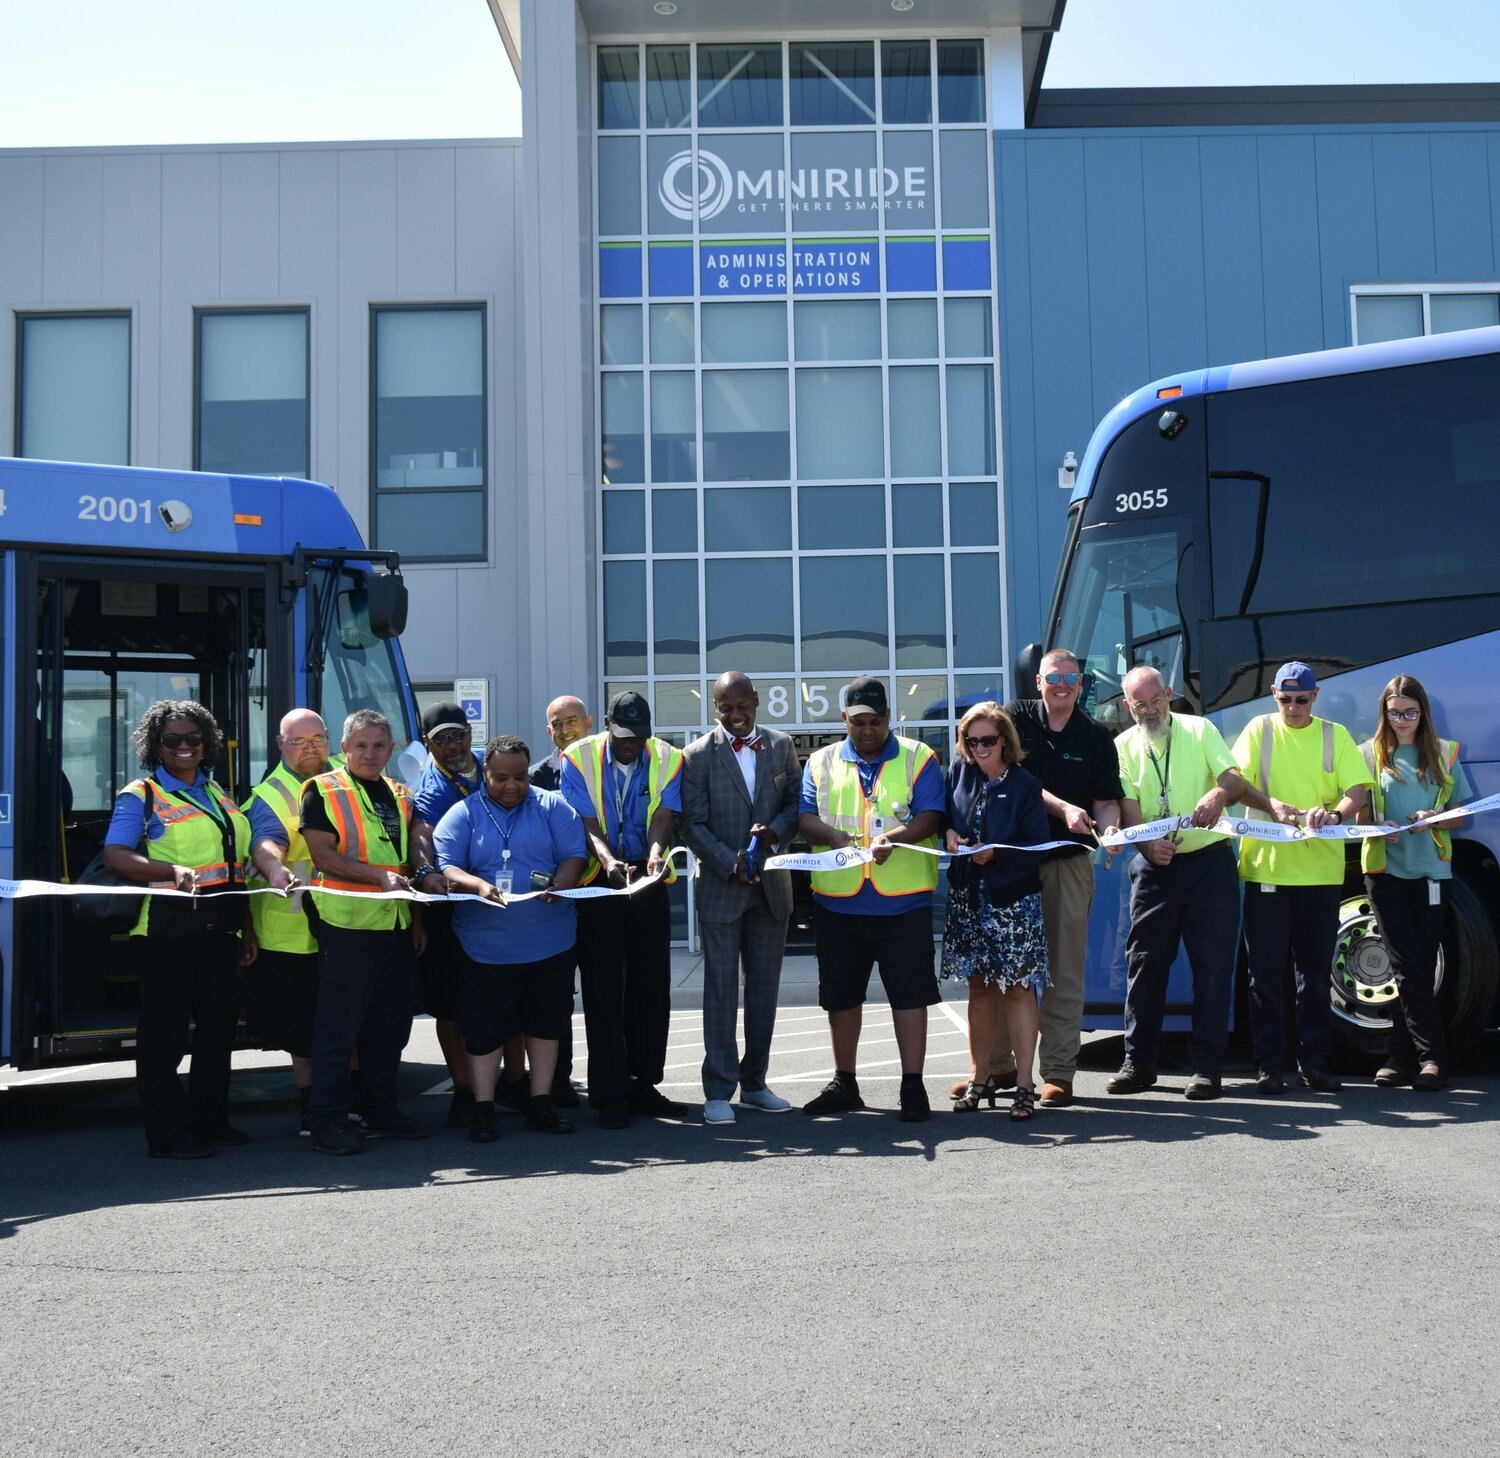 (L-R) PRTC Board Chair Victor Angry, NVTC Executive Director Kate Mattice, OmniRide Executive Director Bob Schneider, and bus operators and mechanics celebrate the opening of the new Manassas bus depot.